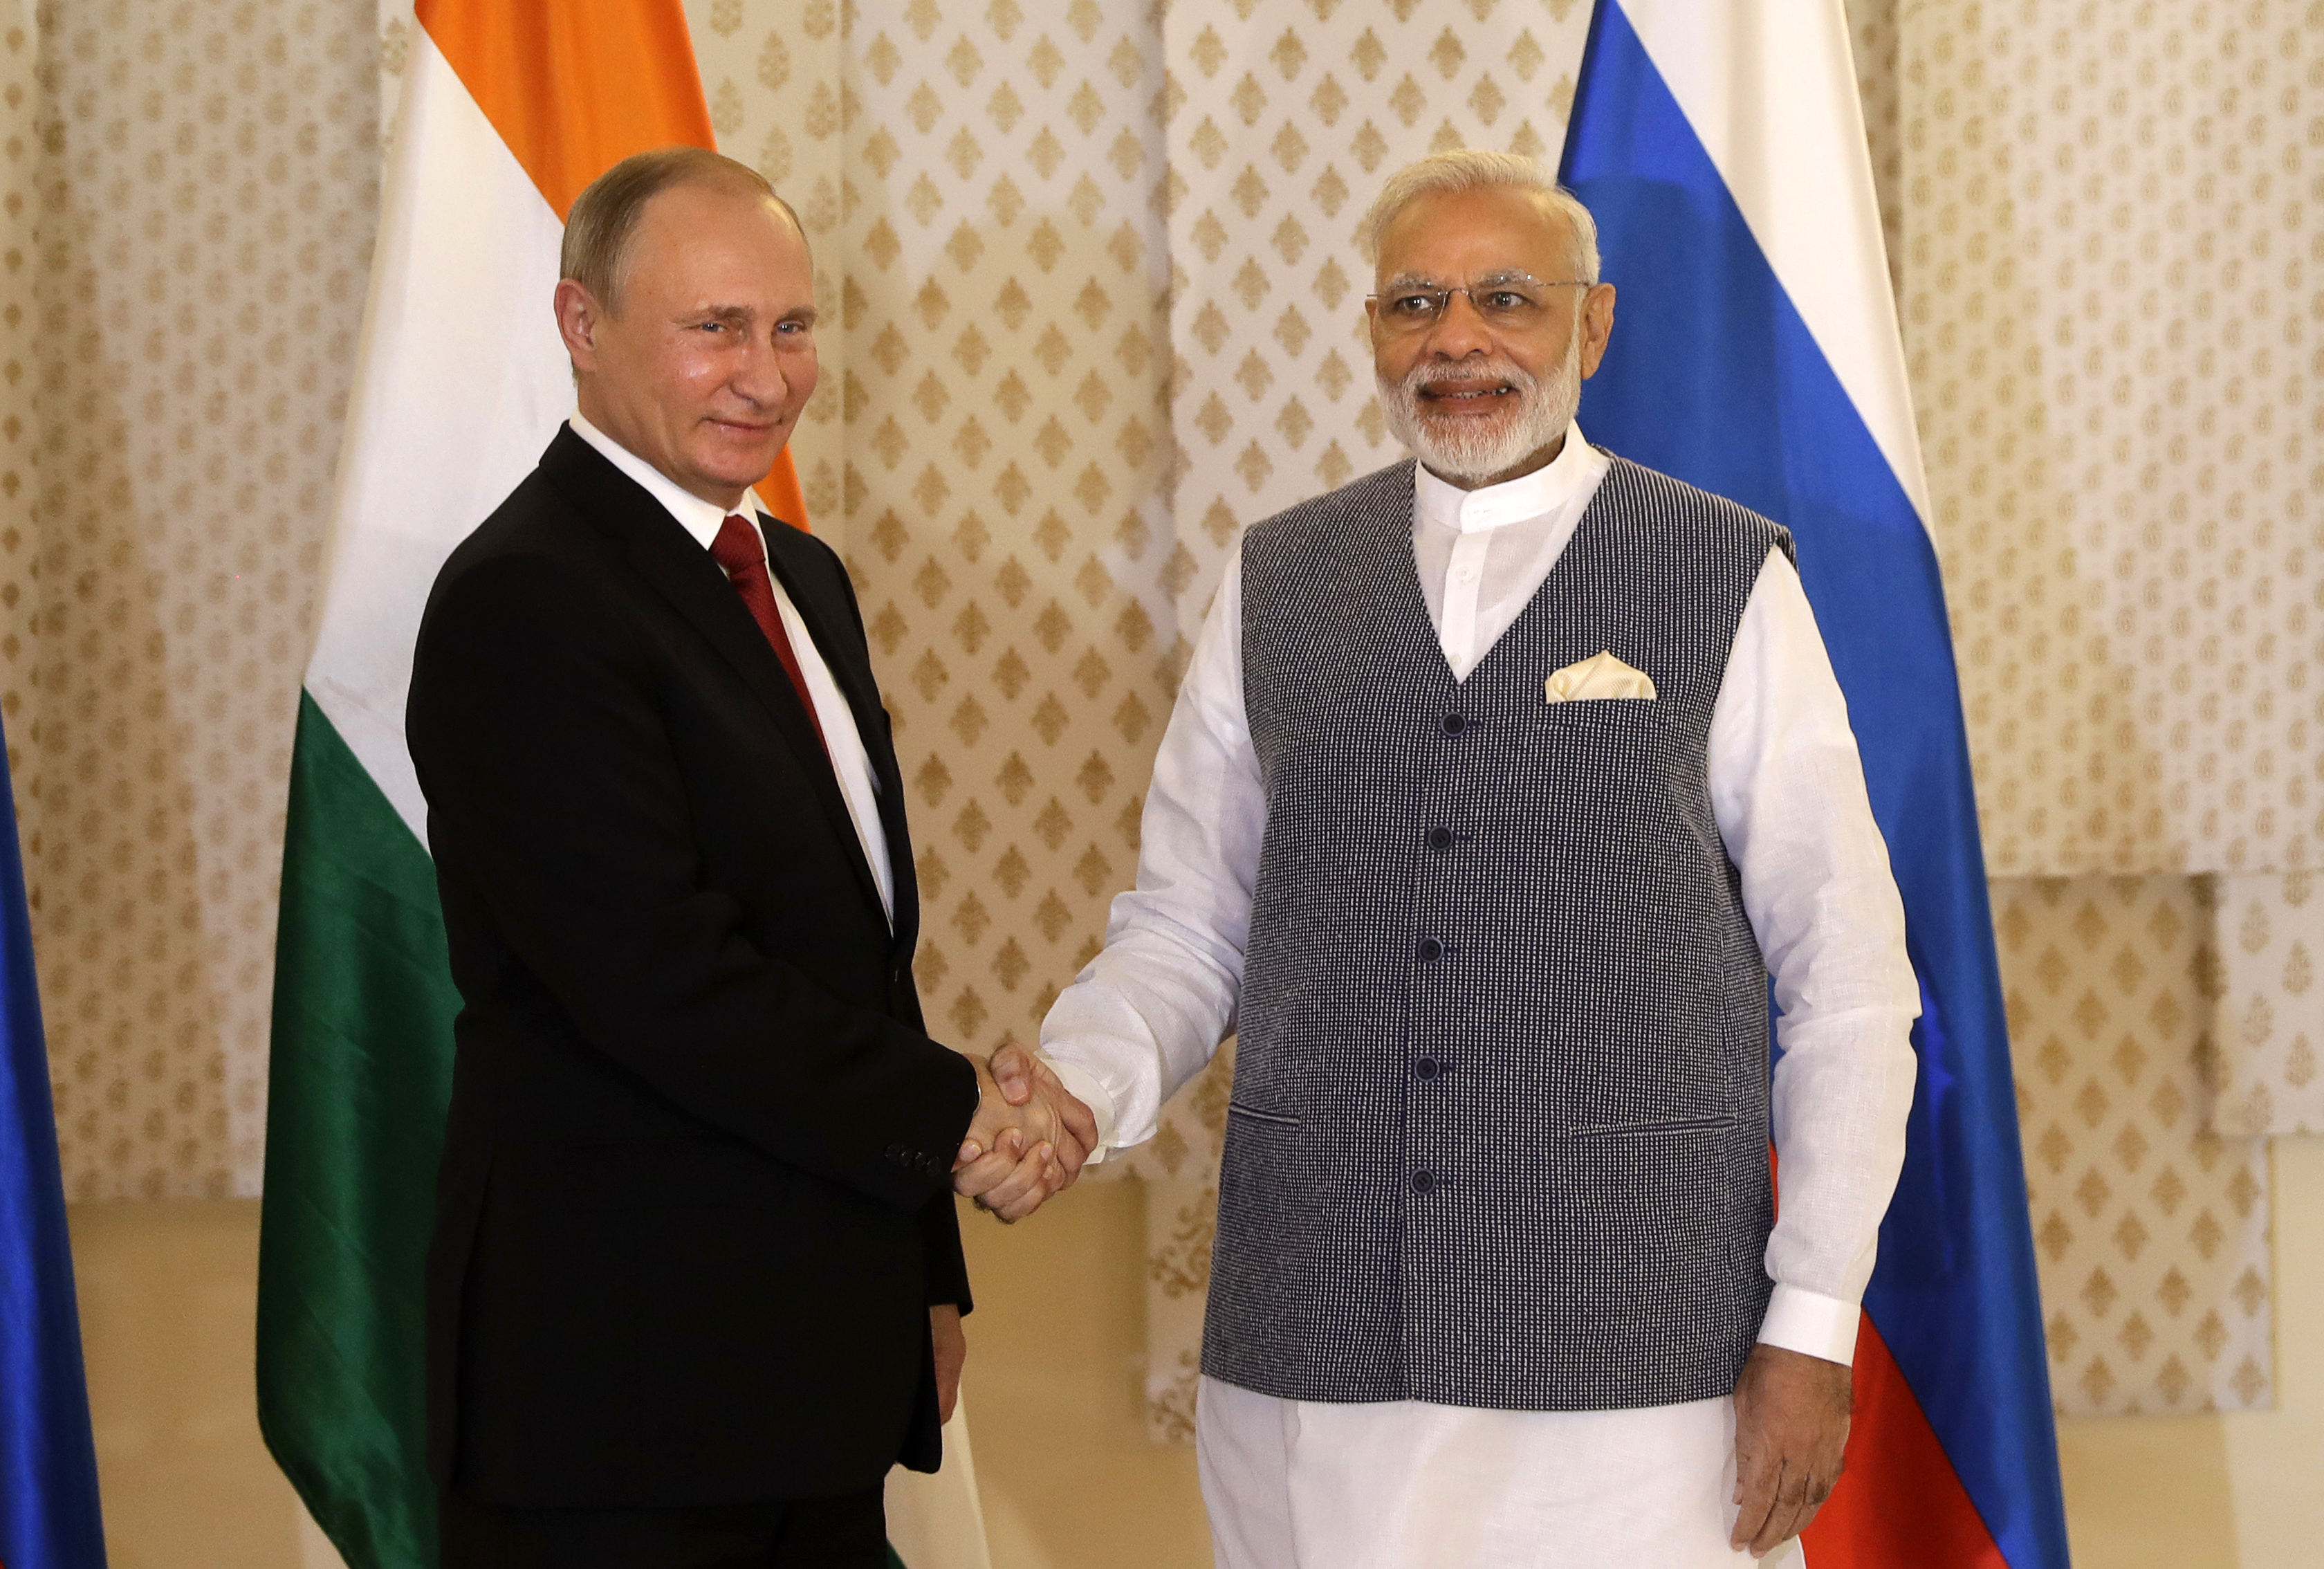 Indian Prime Minister Narendra Modi shakes hand with Russian President Vladimir Putin prior to their annual bilateral meeting, on the sidelines of the BRICS summit, in Goa, Oct. 15, 2016.